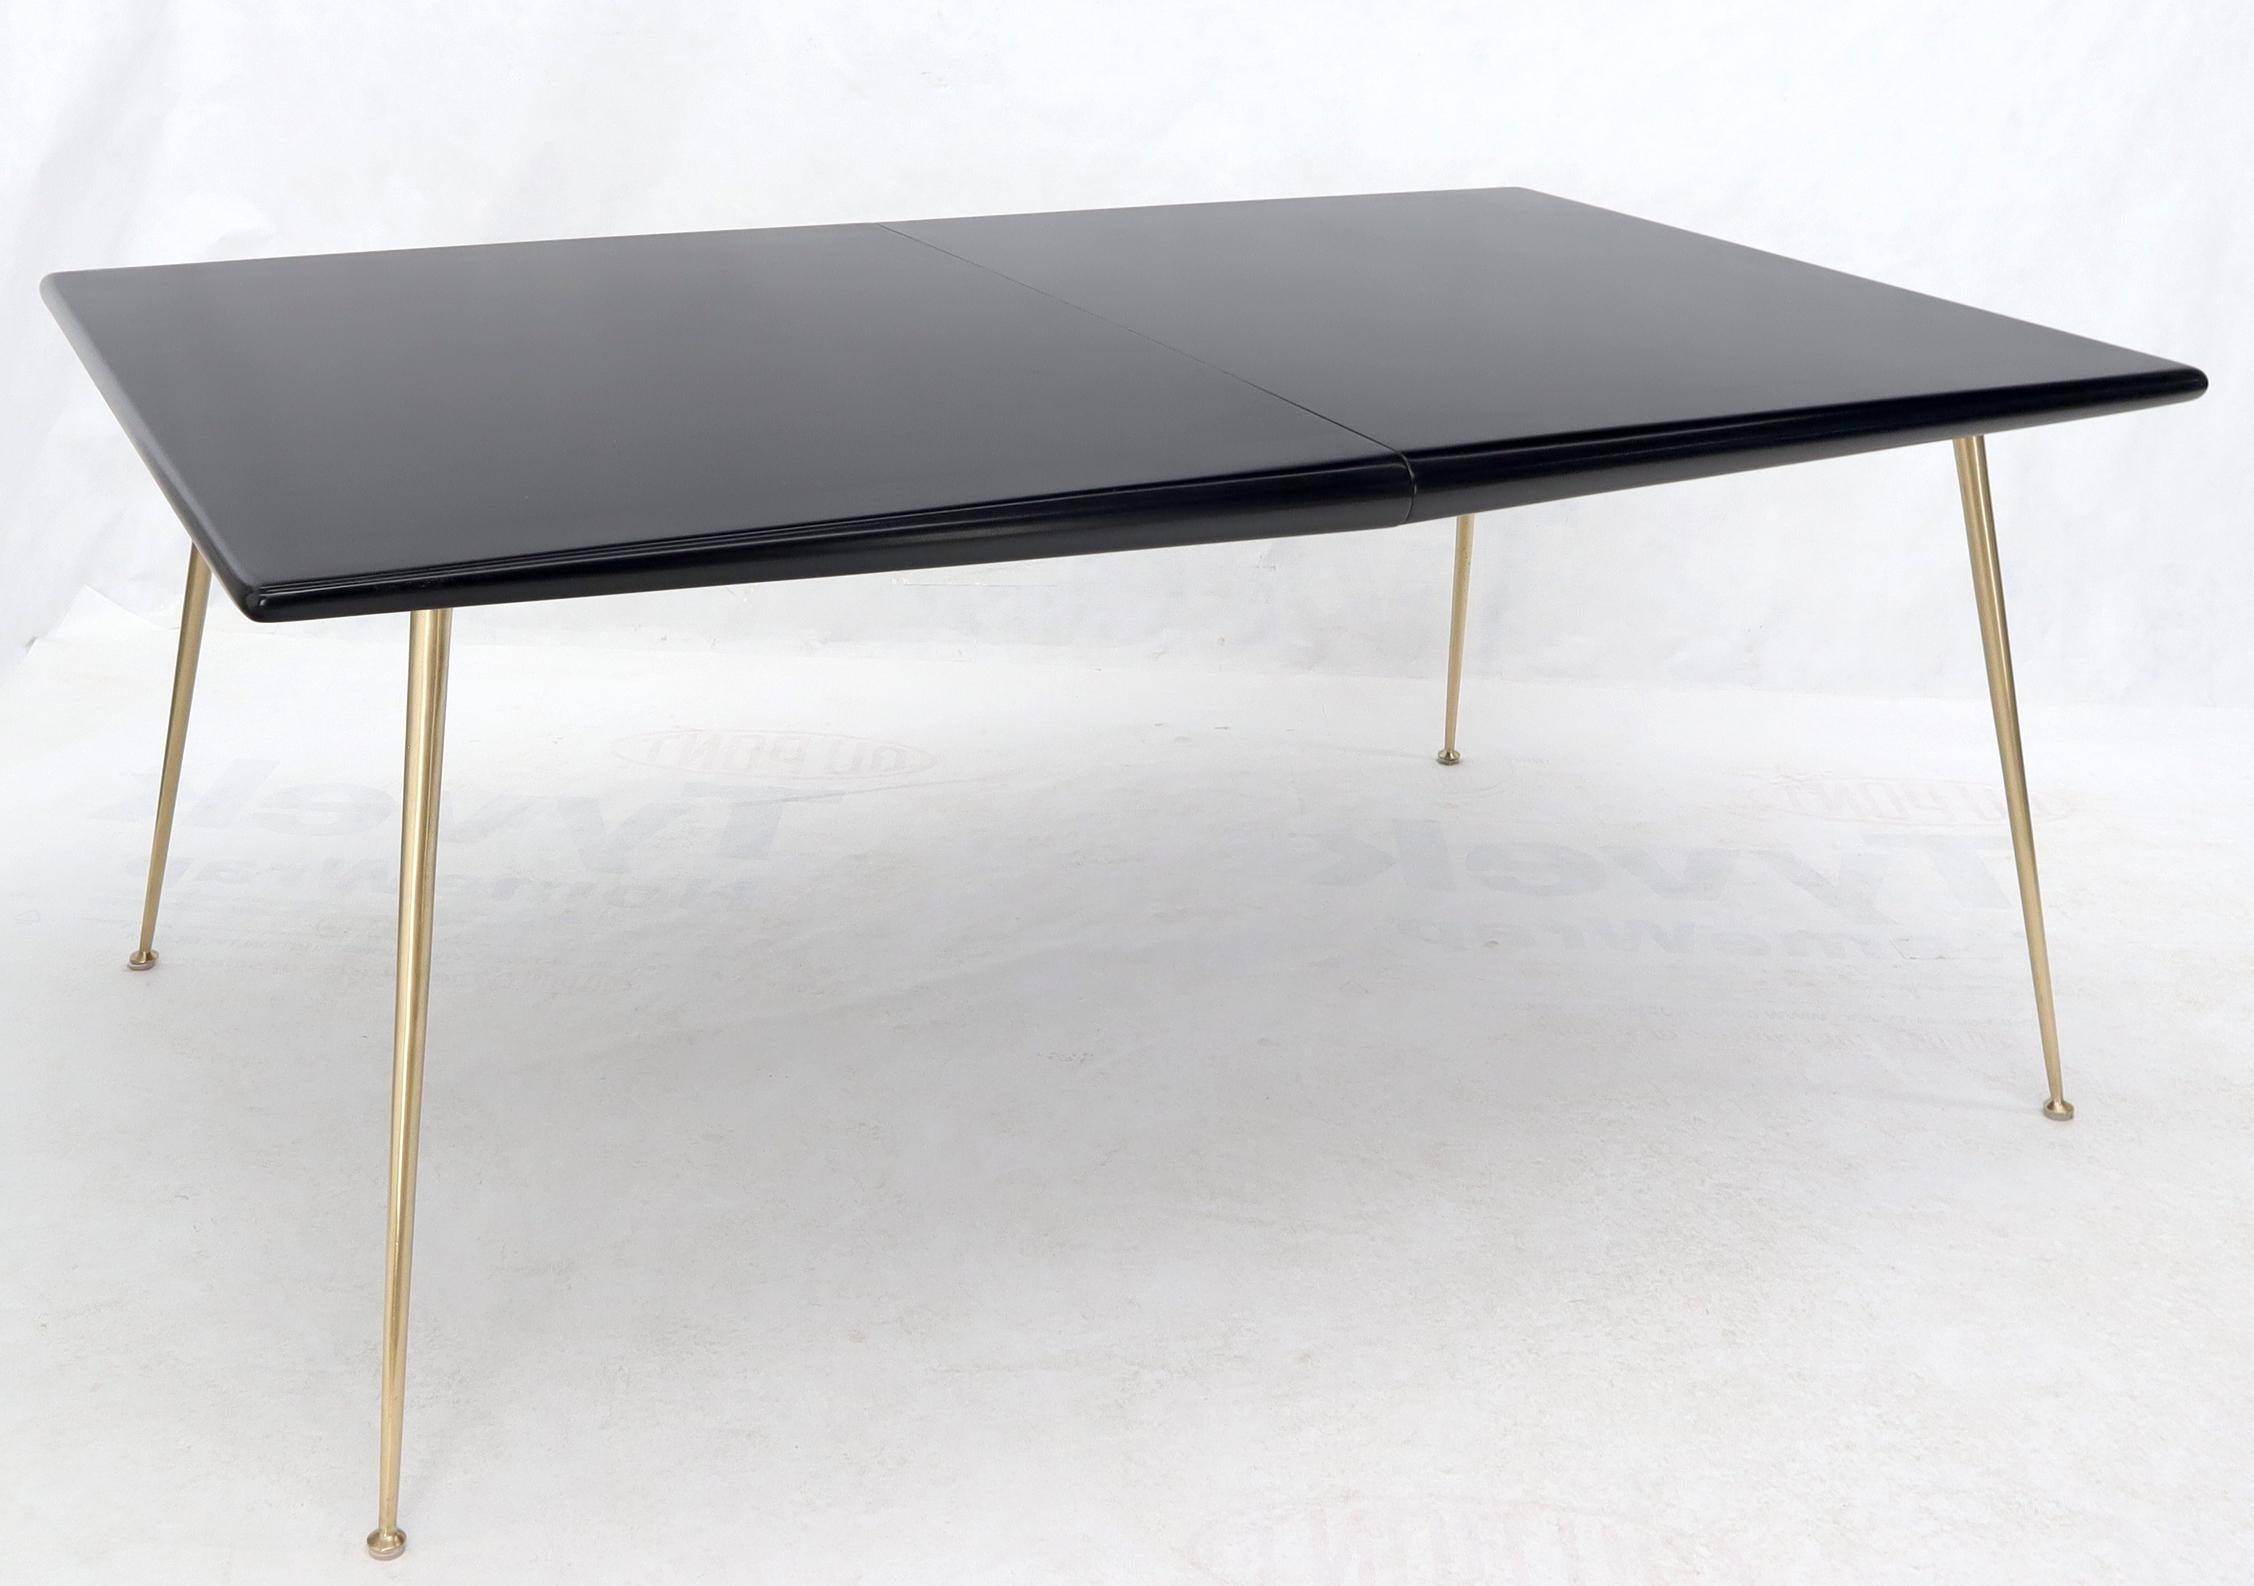 Lacquered Black Lacquer Brass Legs Gibbings Dining Table with 1 Extensions Board For Sale